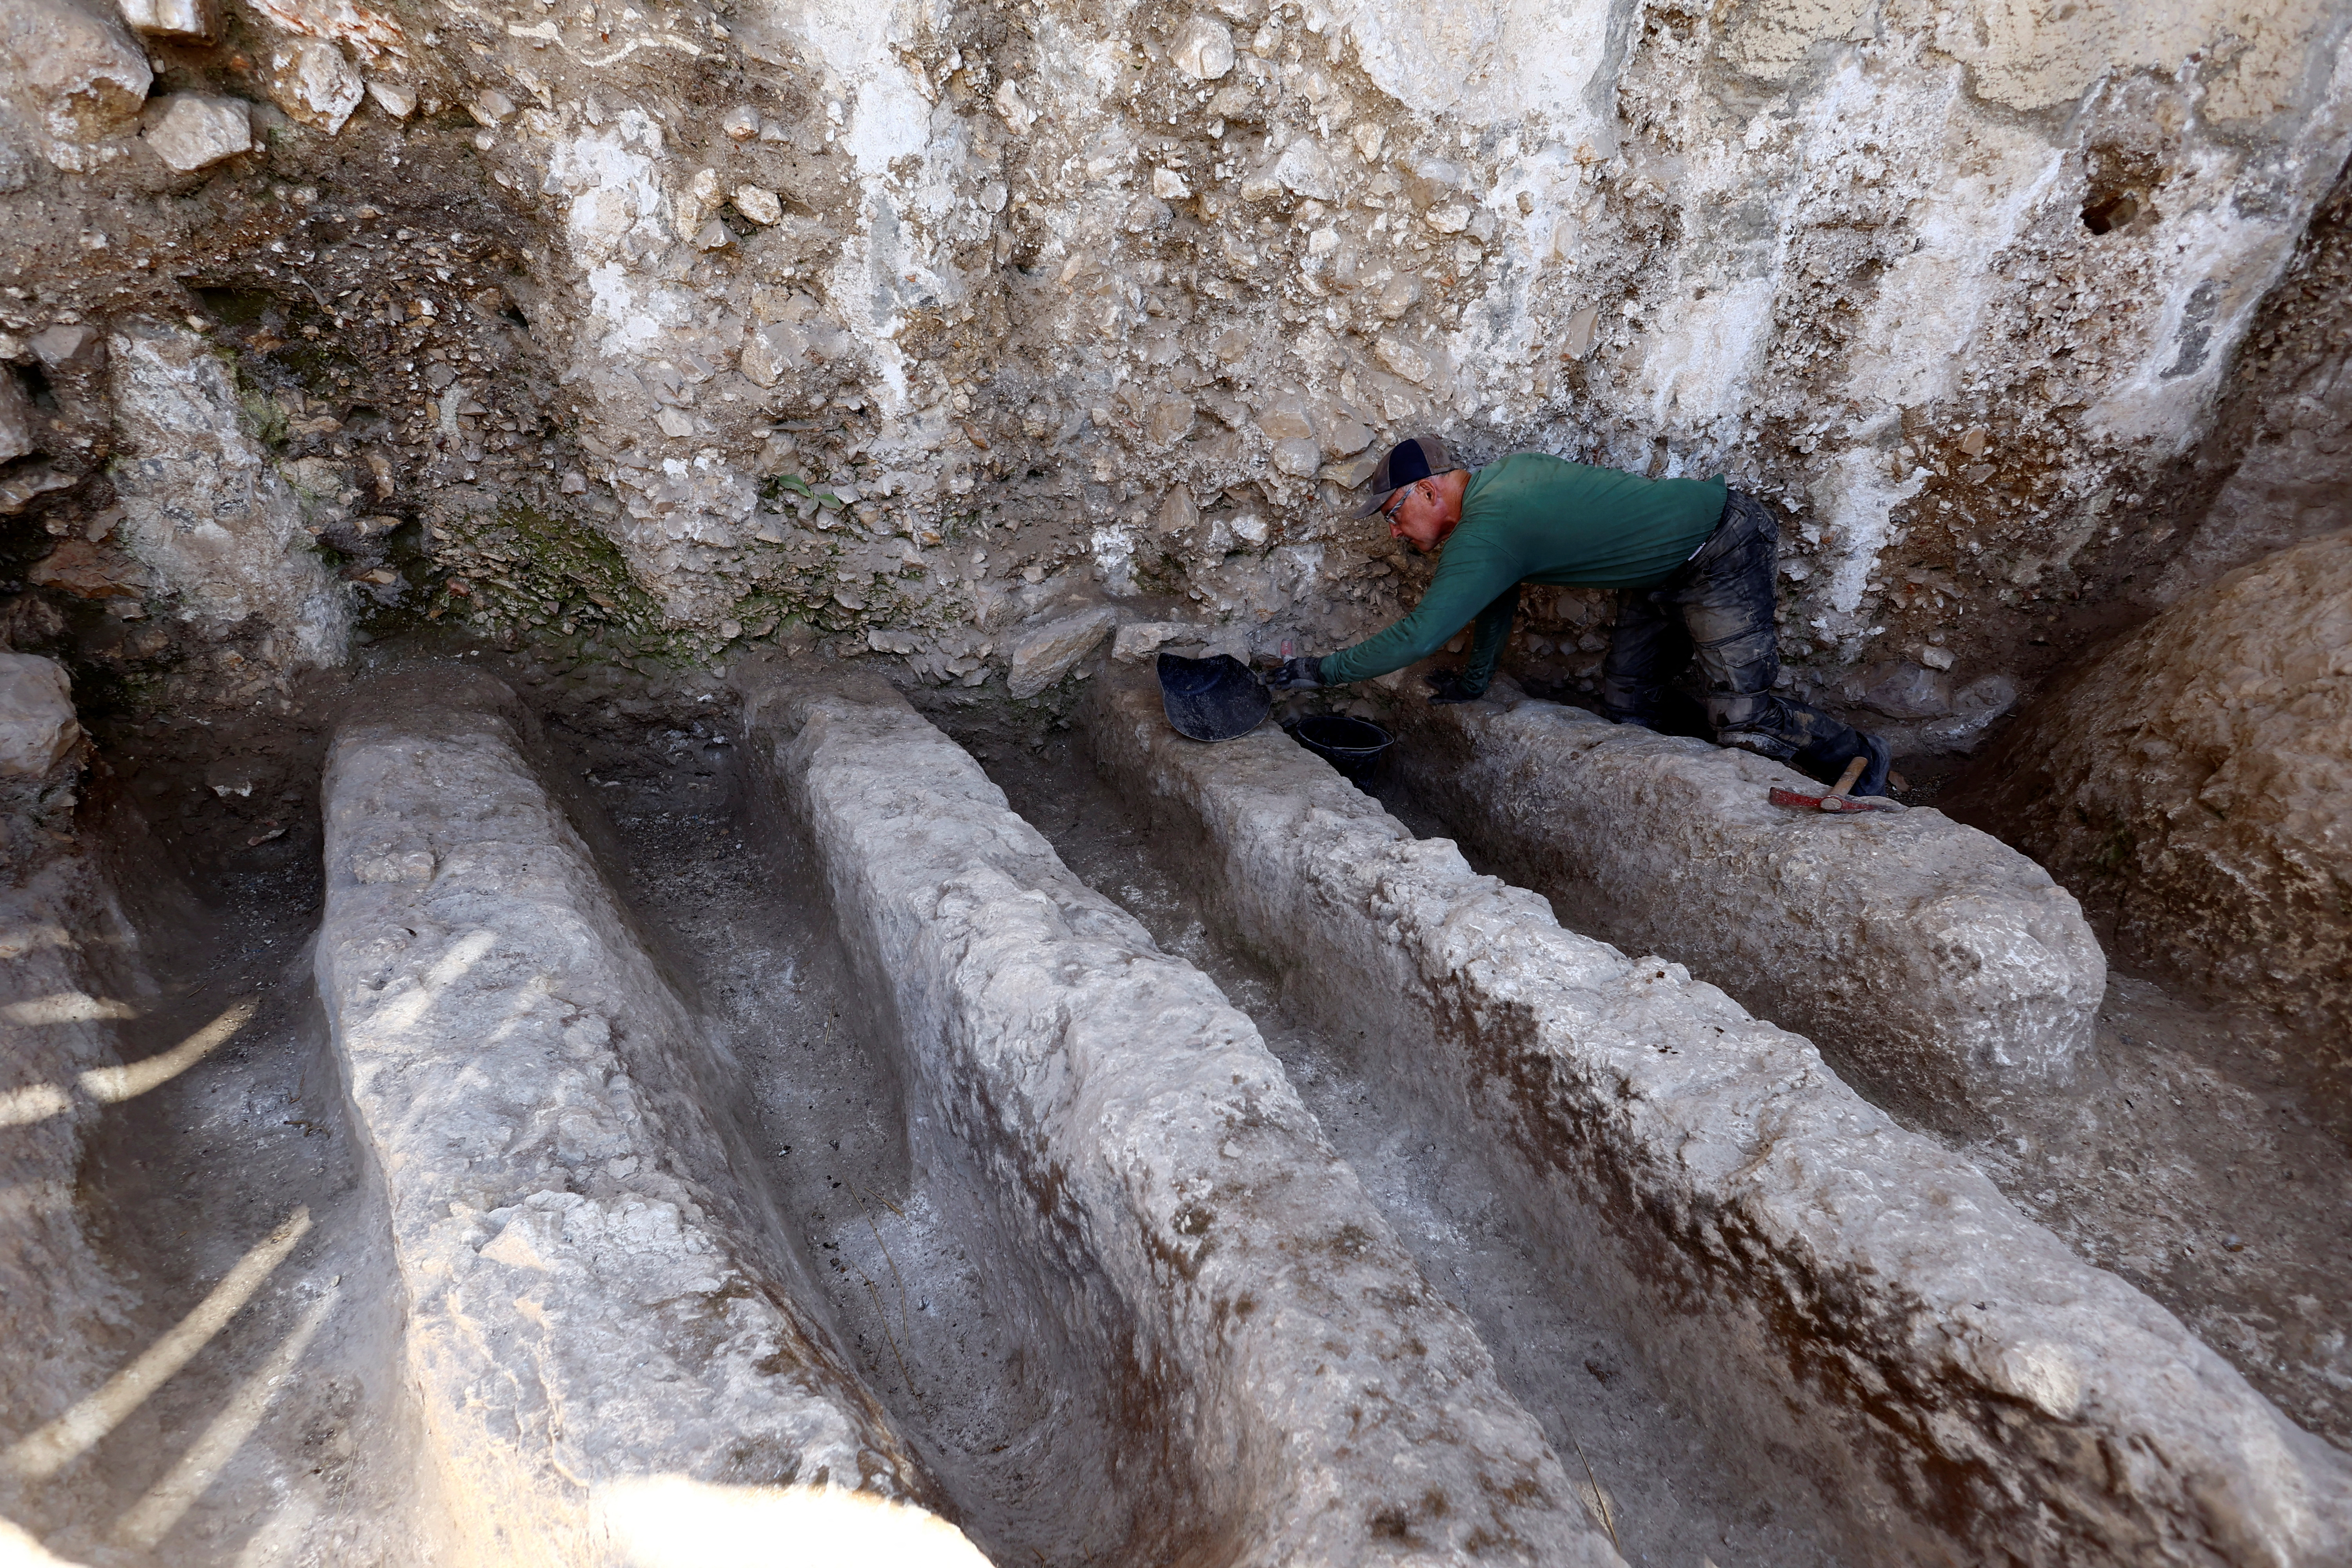 Remnants of an ancient channel network of hewn-rock ducts which the Israel Antiquities Authority says were in use around 2,800 years ago have baffled archaeologists in Jerusalem